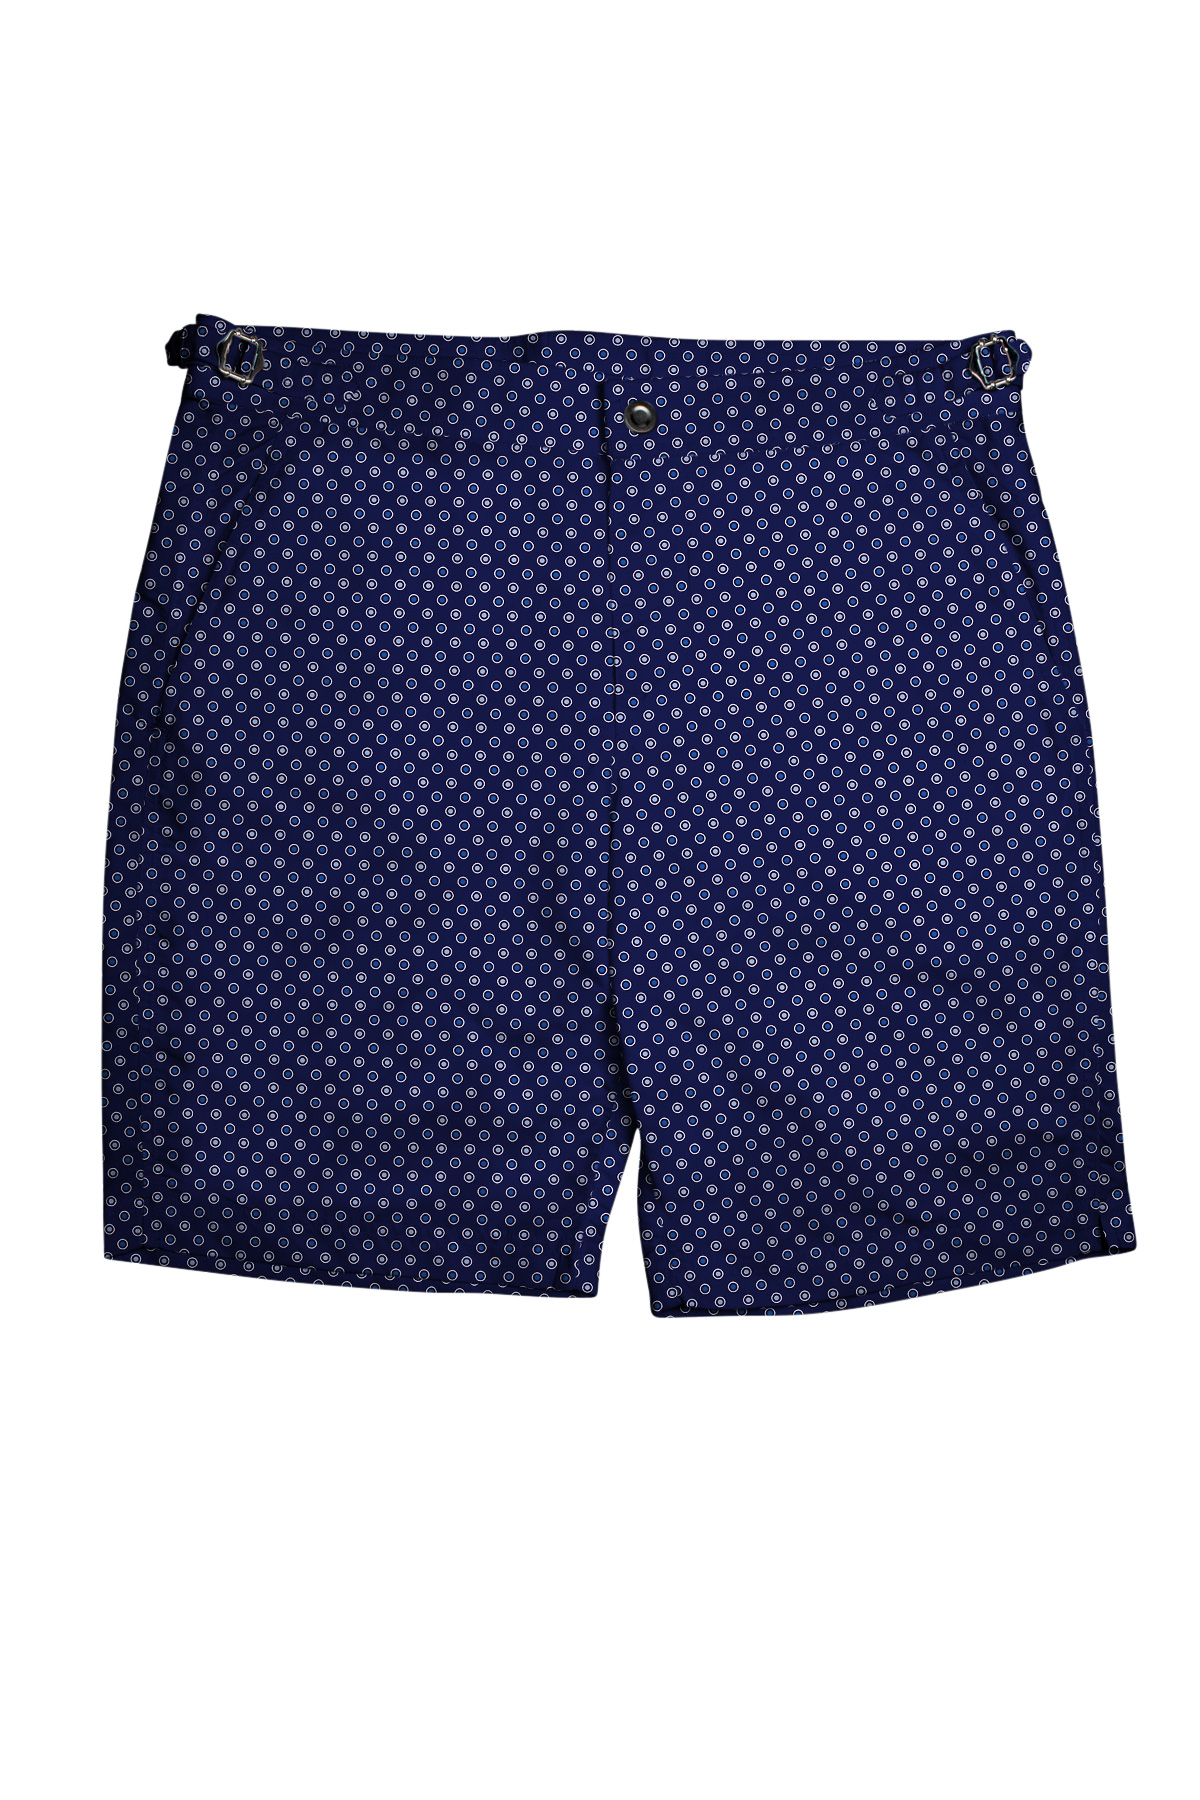 Navy with Blue and Light Blue Dots Swim Shorts